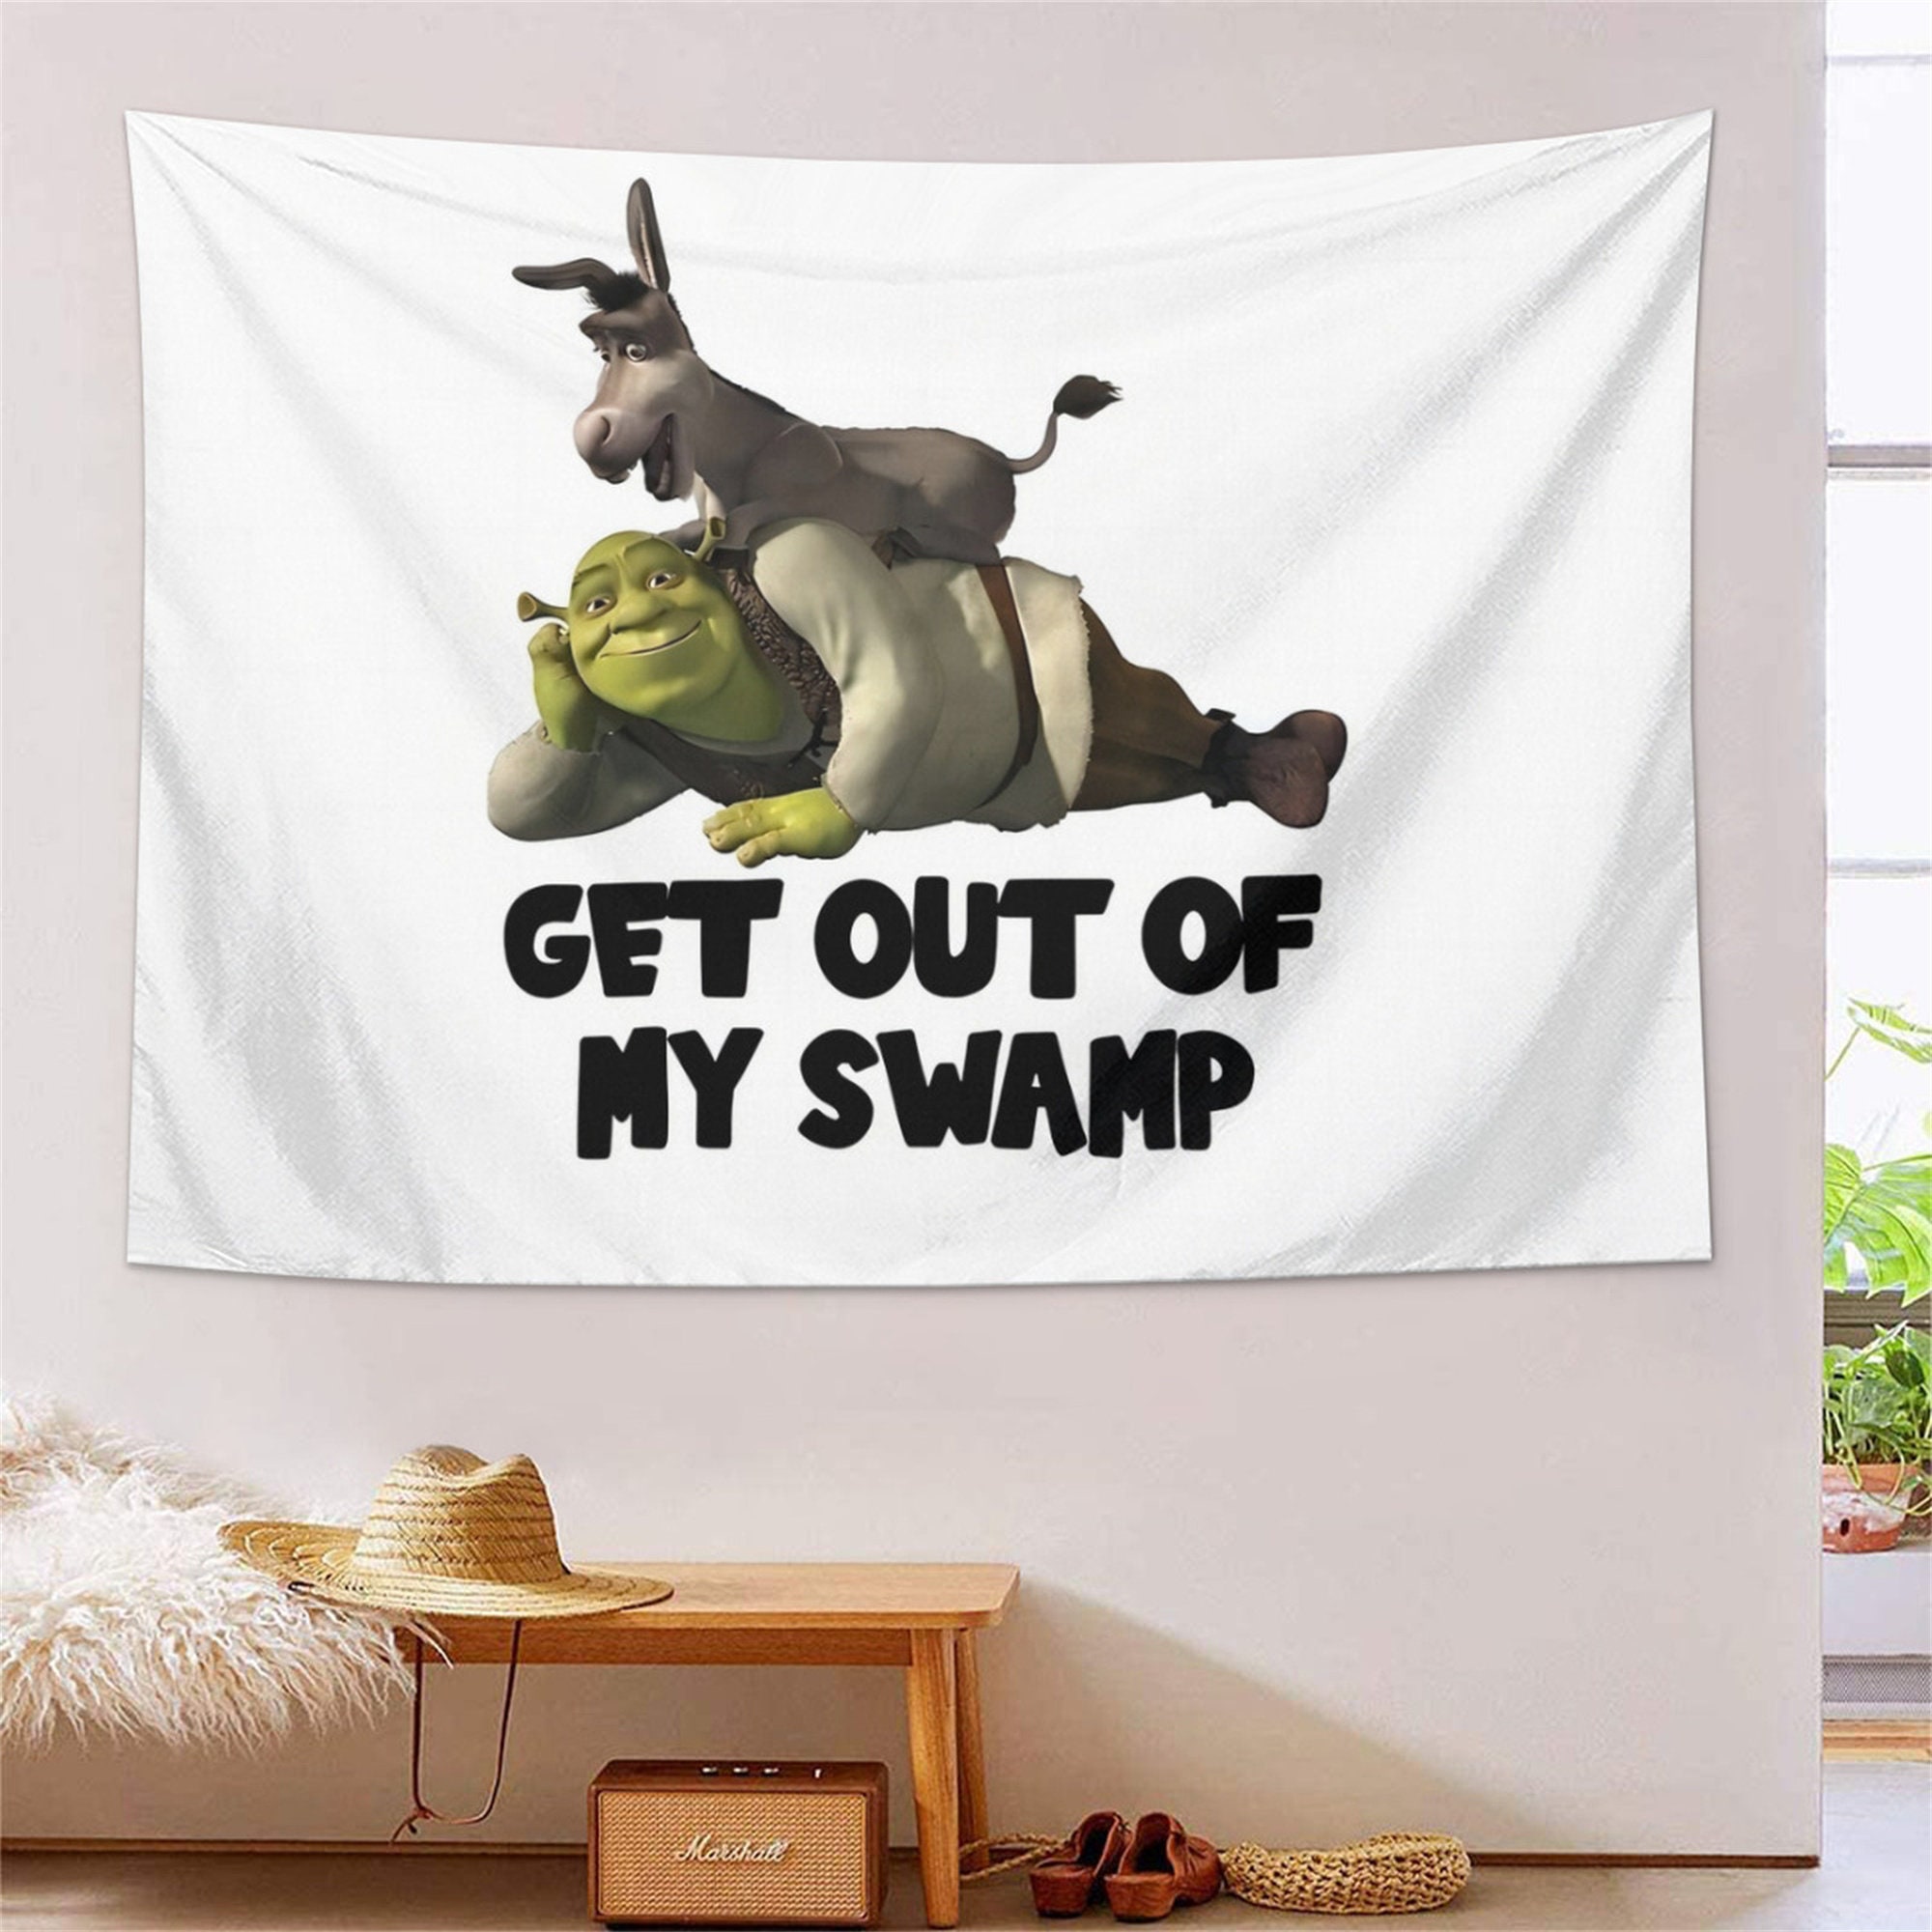 Get Out of My Swamp Shrek Wall Tapestry Funny Meme Tapestries